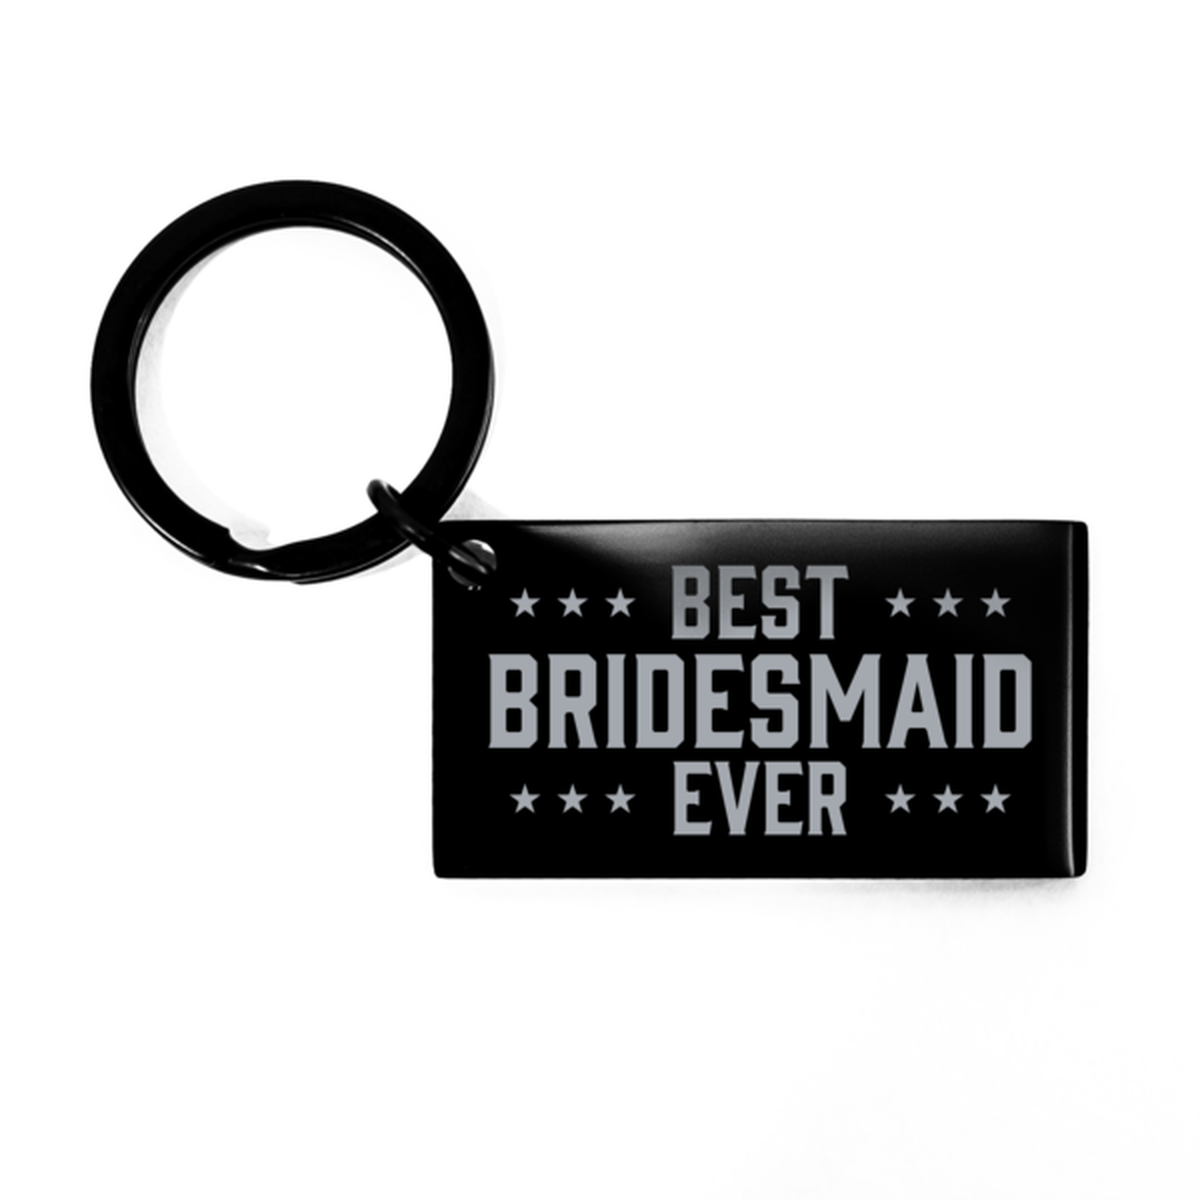 Best Bridemaid Ever Bridemaid Gifts, Funny Black Keychain For Bridemaid, Birthday Engraved Keyring Presents For Women